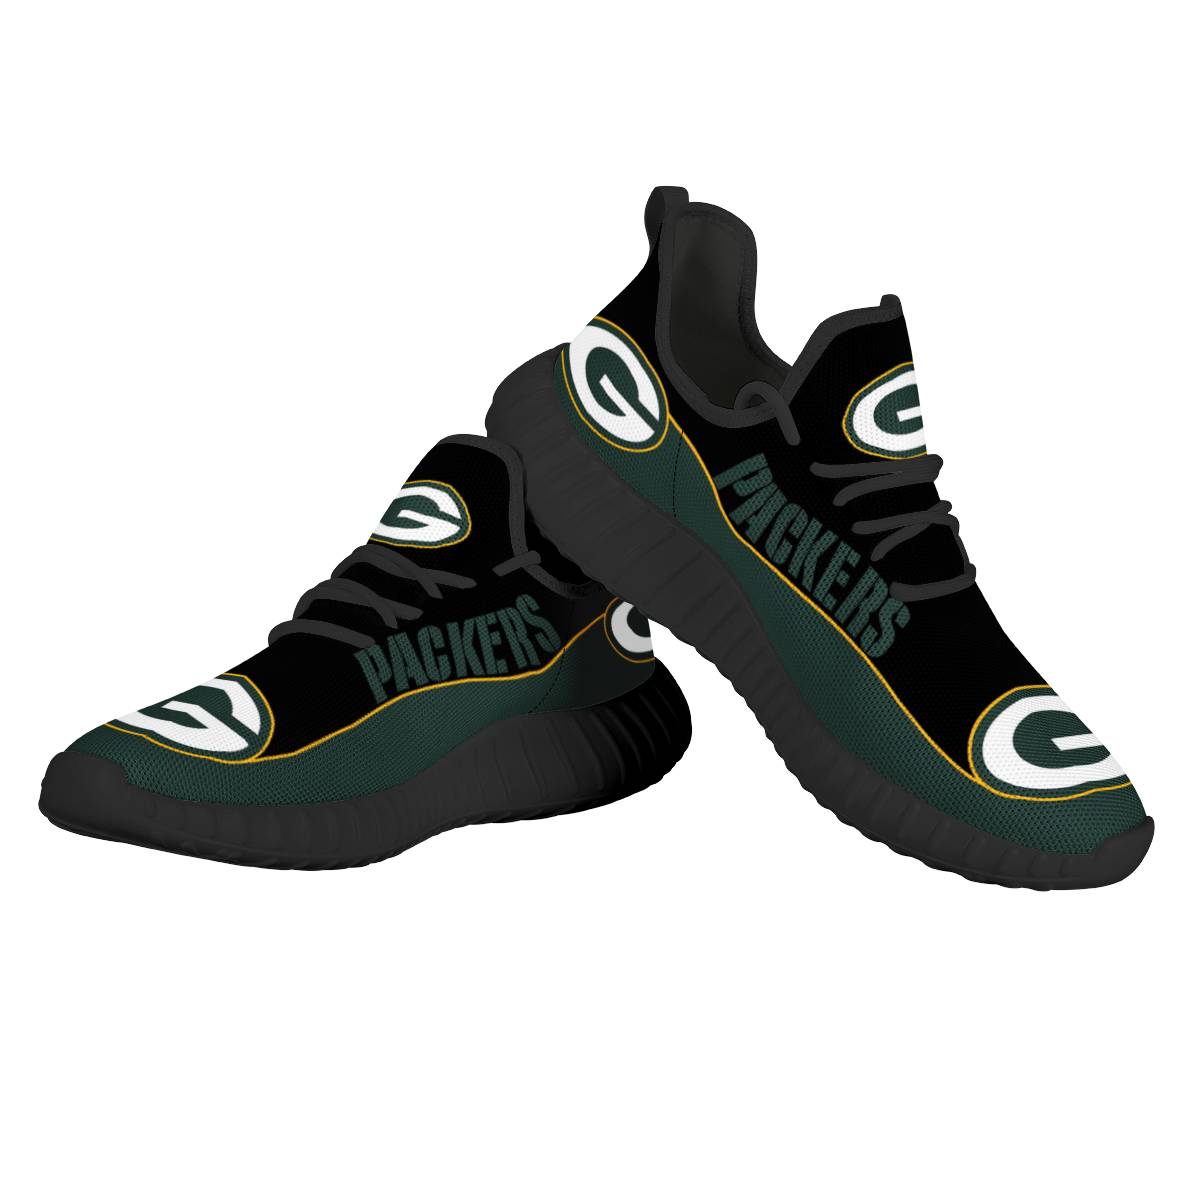 Women's NFL Green Bay Packers Mesh Knit Sneakers/Shoes 008